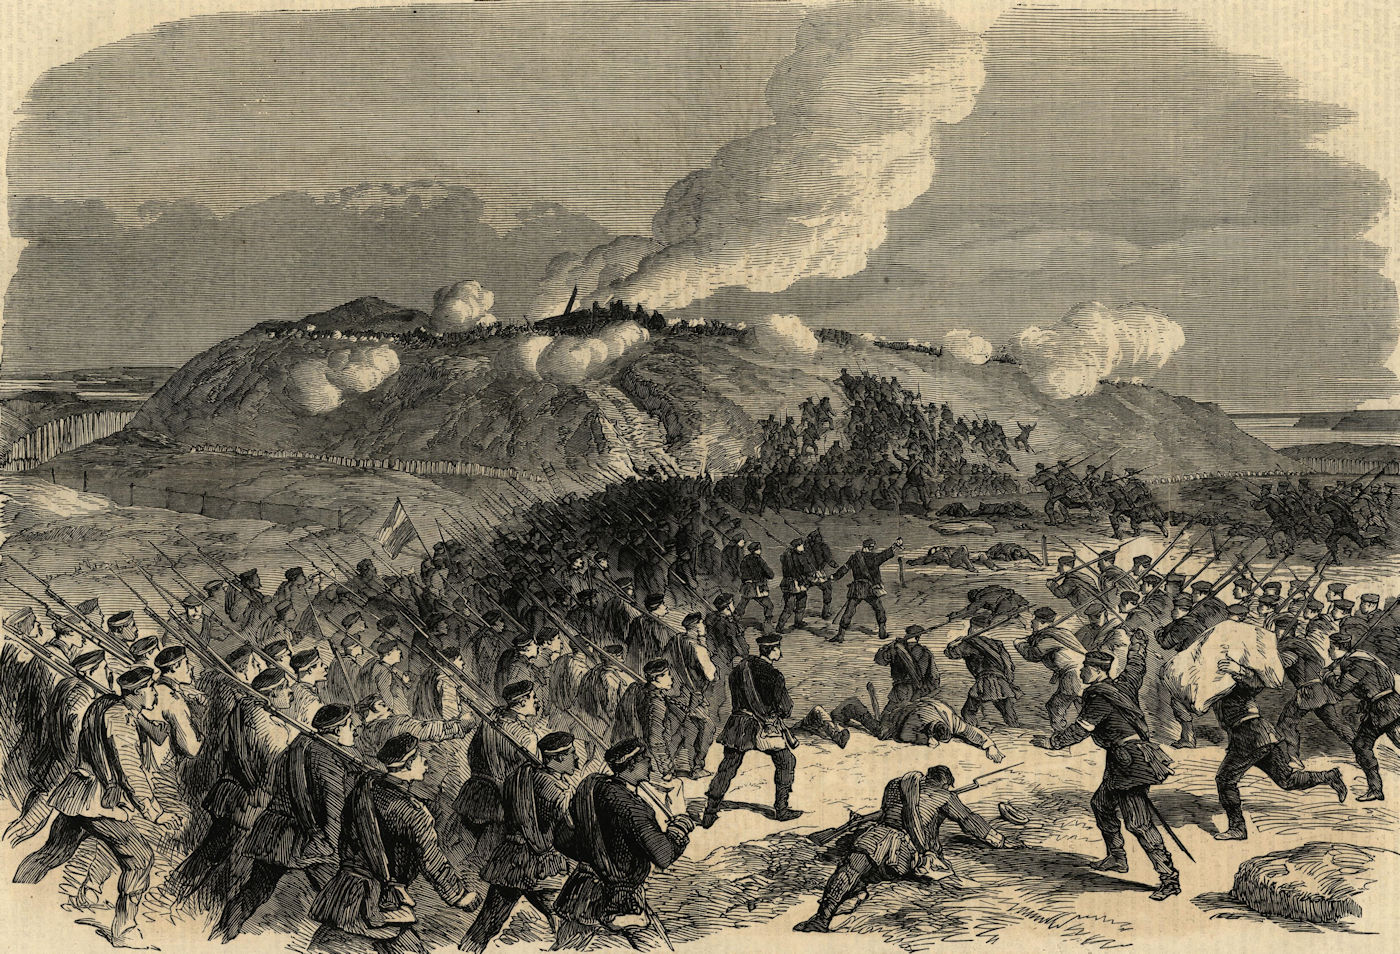 Associate Product The war in Denmark: the assault on No. 4 redoubt at Dybbol. Militaria 1864